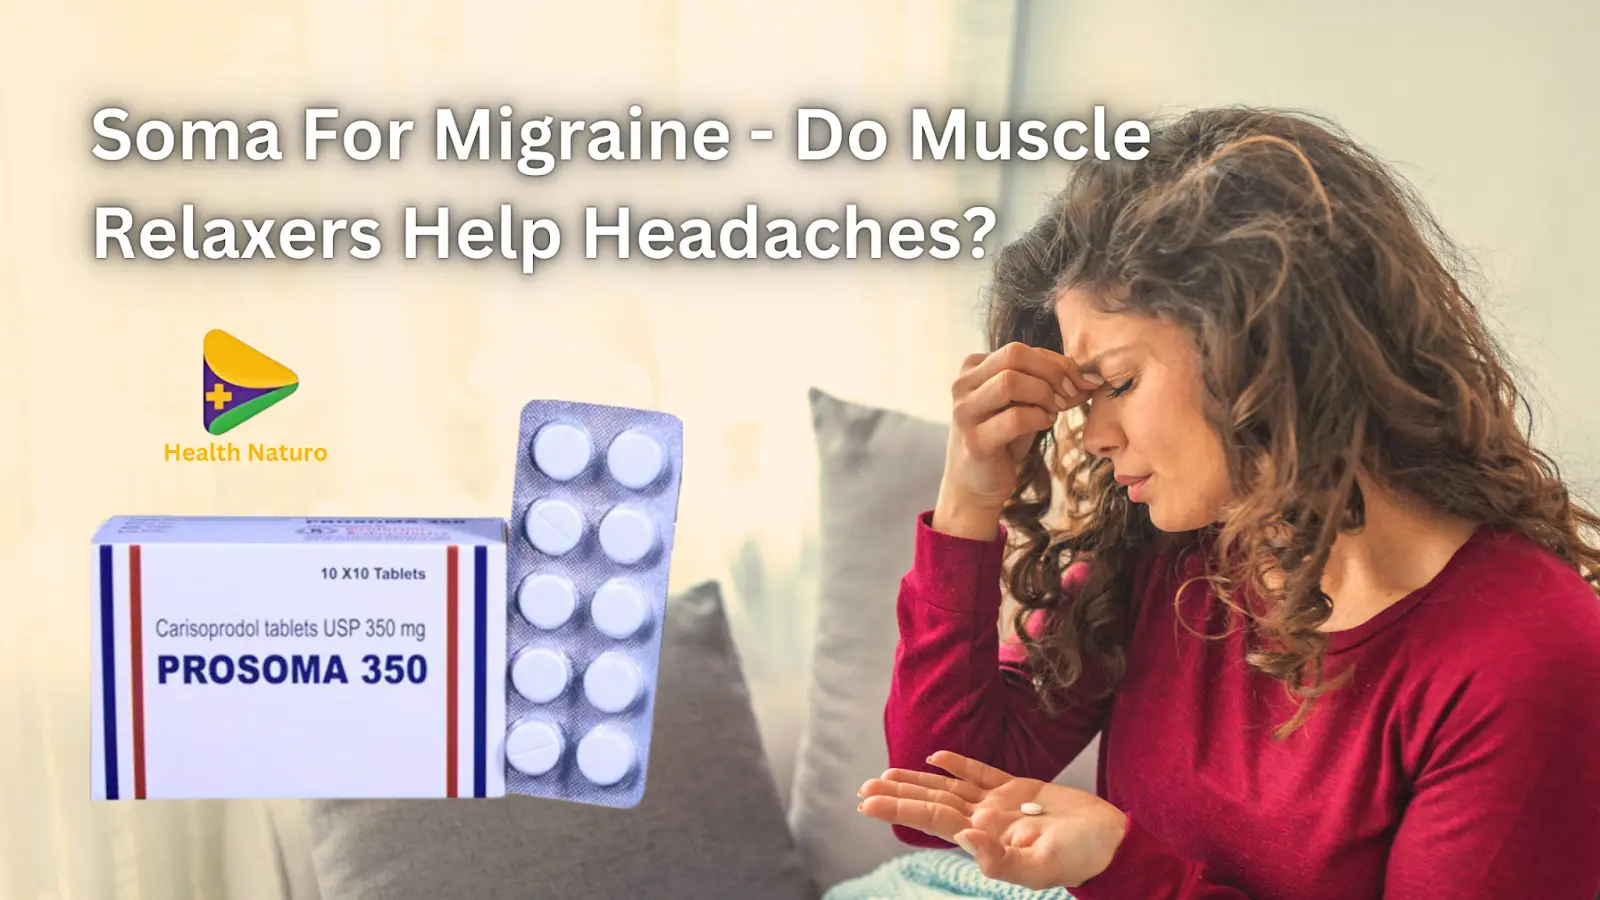 Soma For Migraine- Do Muscle Relaxers Help Headaches?